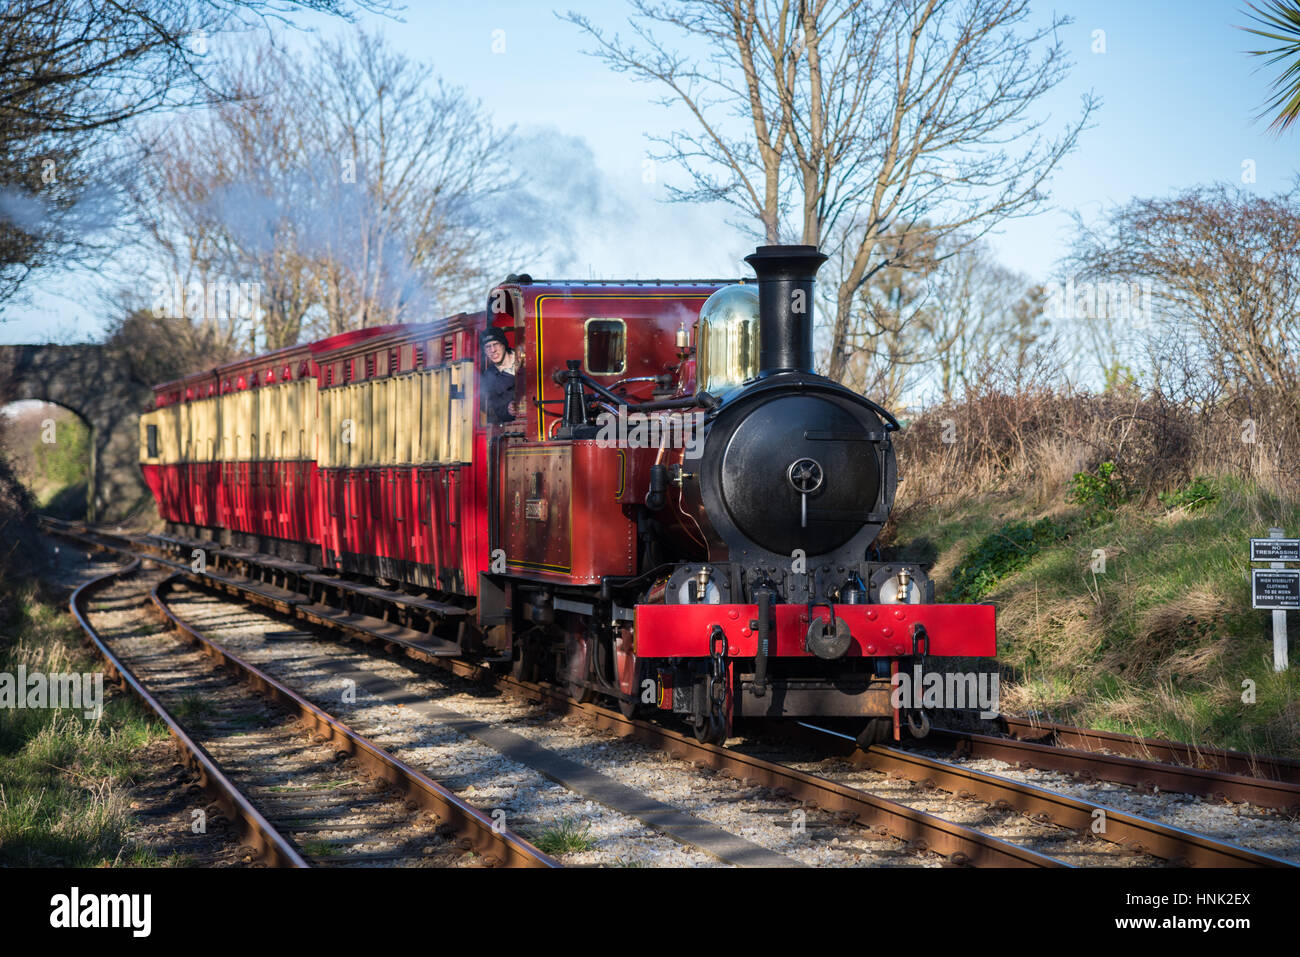 Steam locomotive No. 12, 'Hutchinson', Built 1908. Approaching Castletown station, Isle of Man. Stock Photo